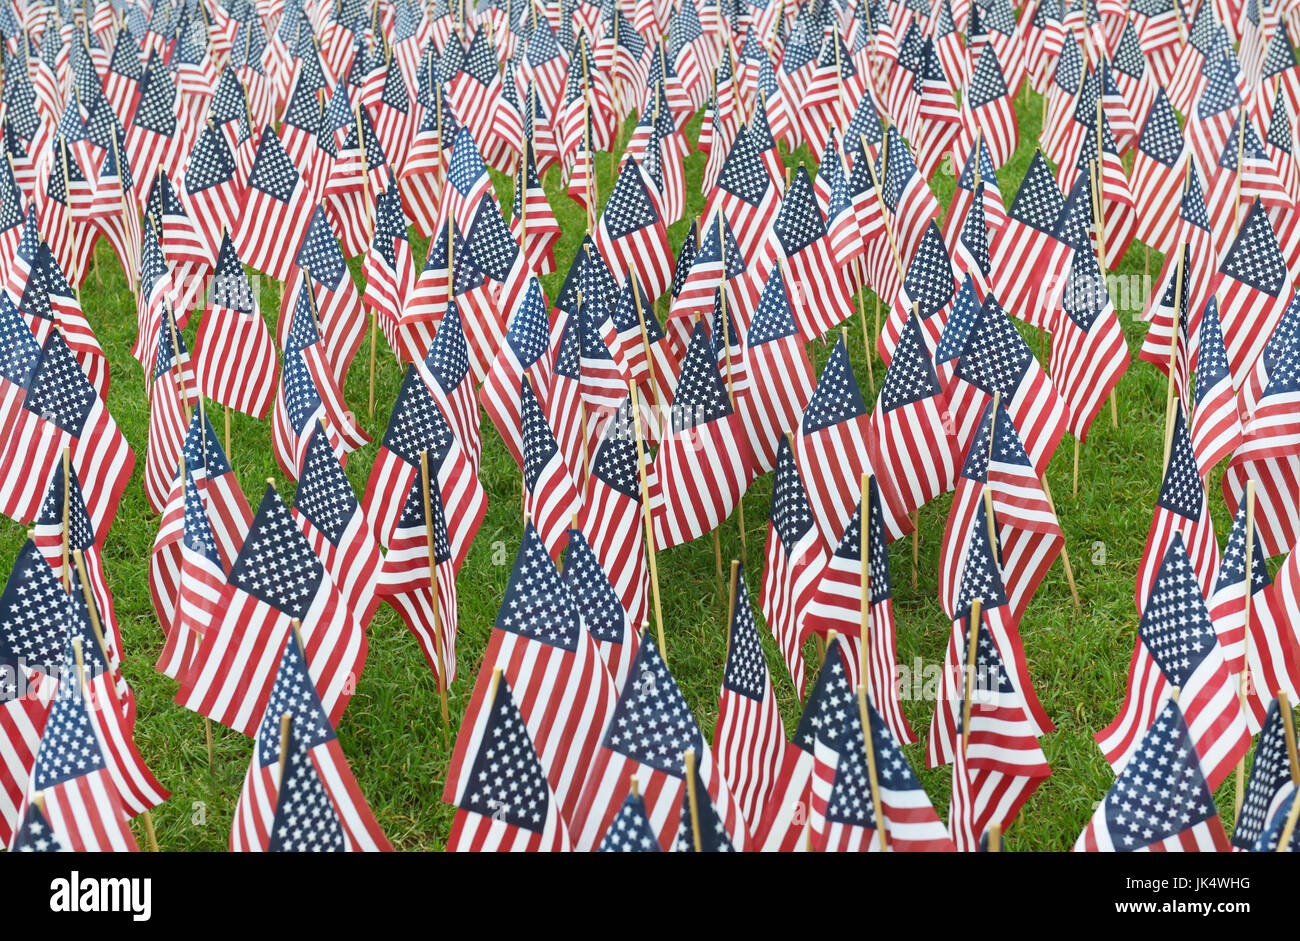 American flags planted on a park lawn Stock Photo